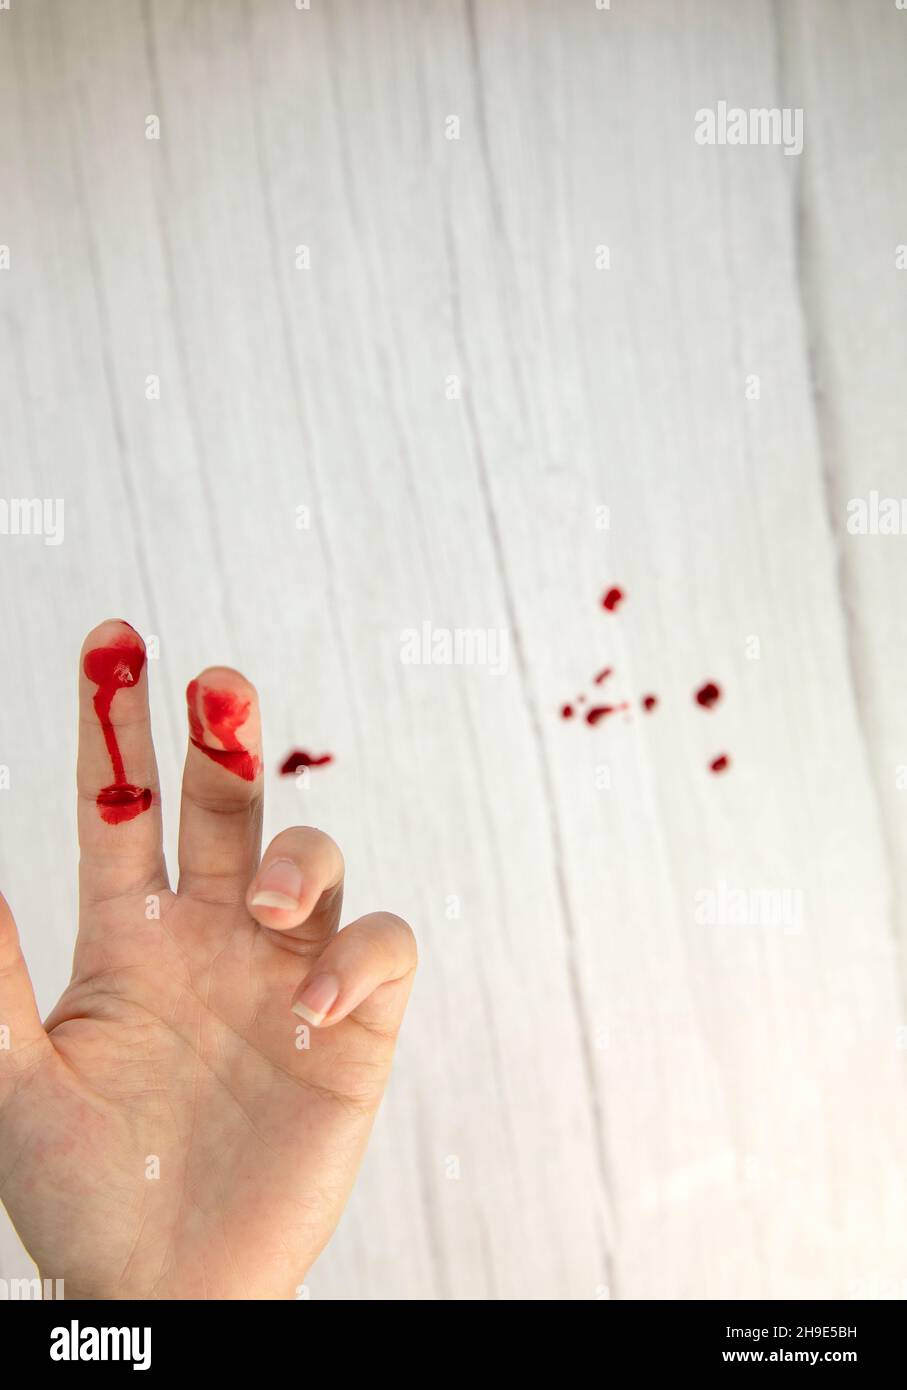 hand injury with blood, blood wound cut top view, copy space, medical concept needs stitches Stock Photo